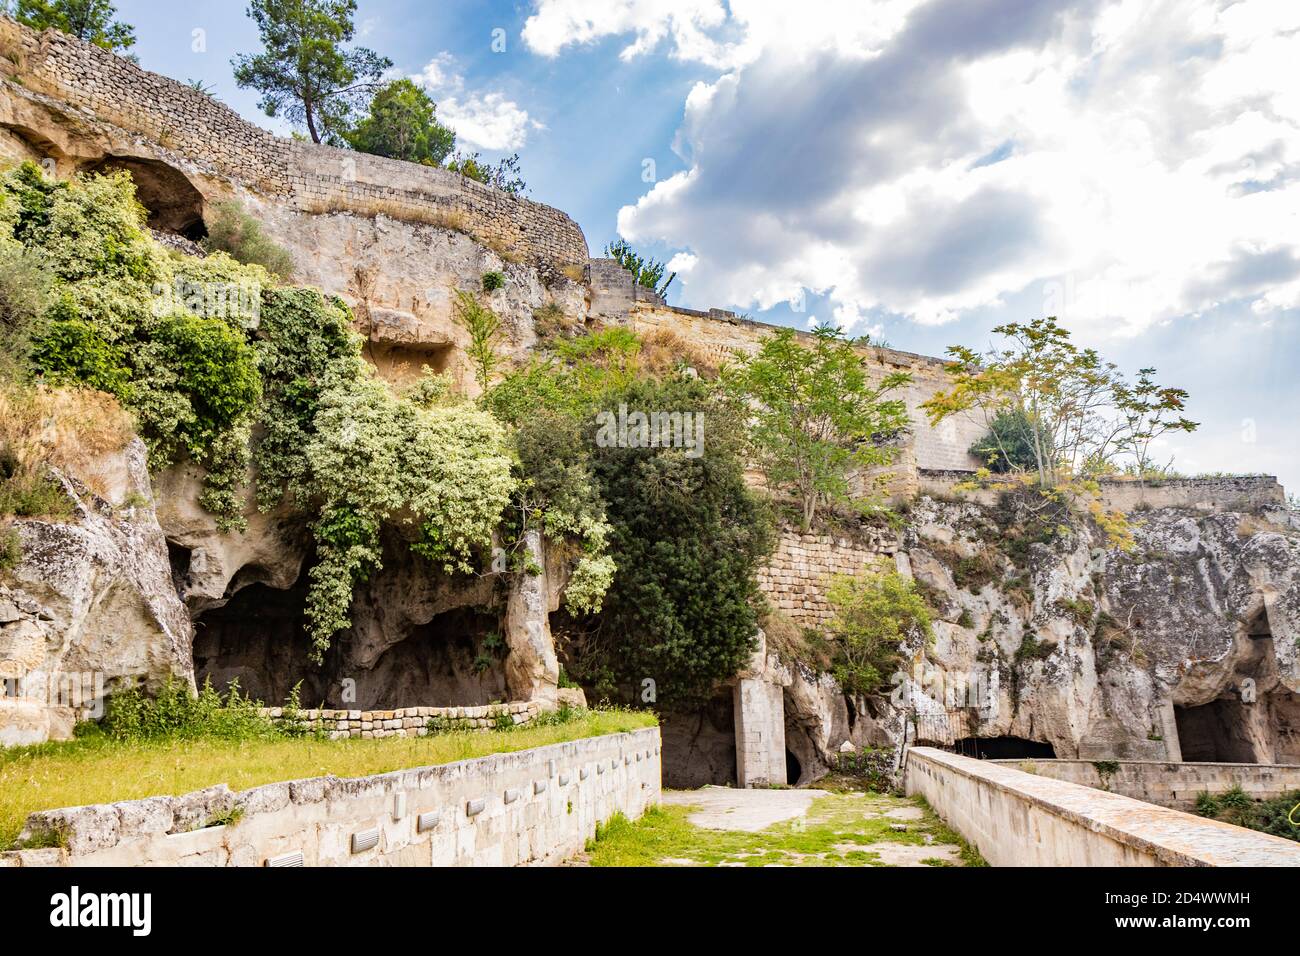 Gravina in Puglia, Italy. The ancient and beautiful cave church of San Michele delle Grotte, carved into the rock. Stock Photo